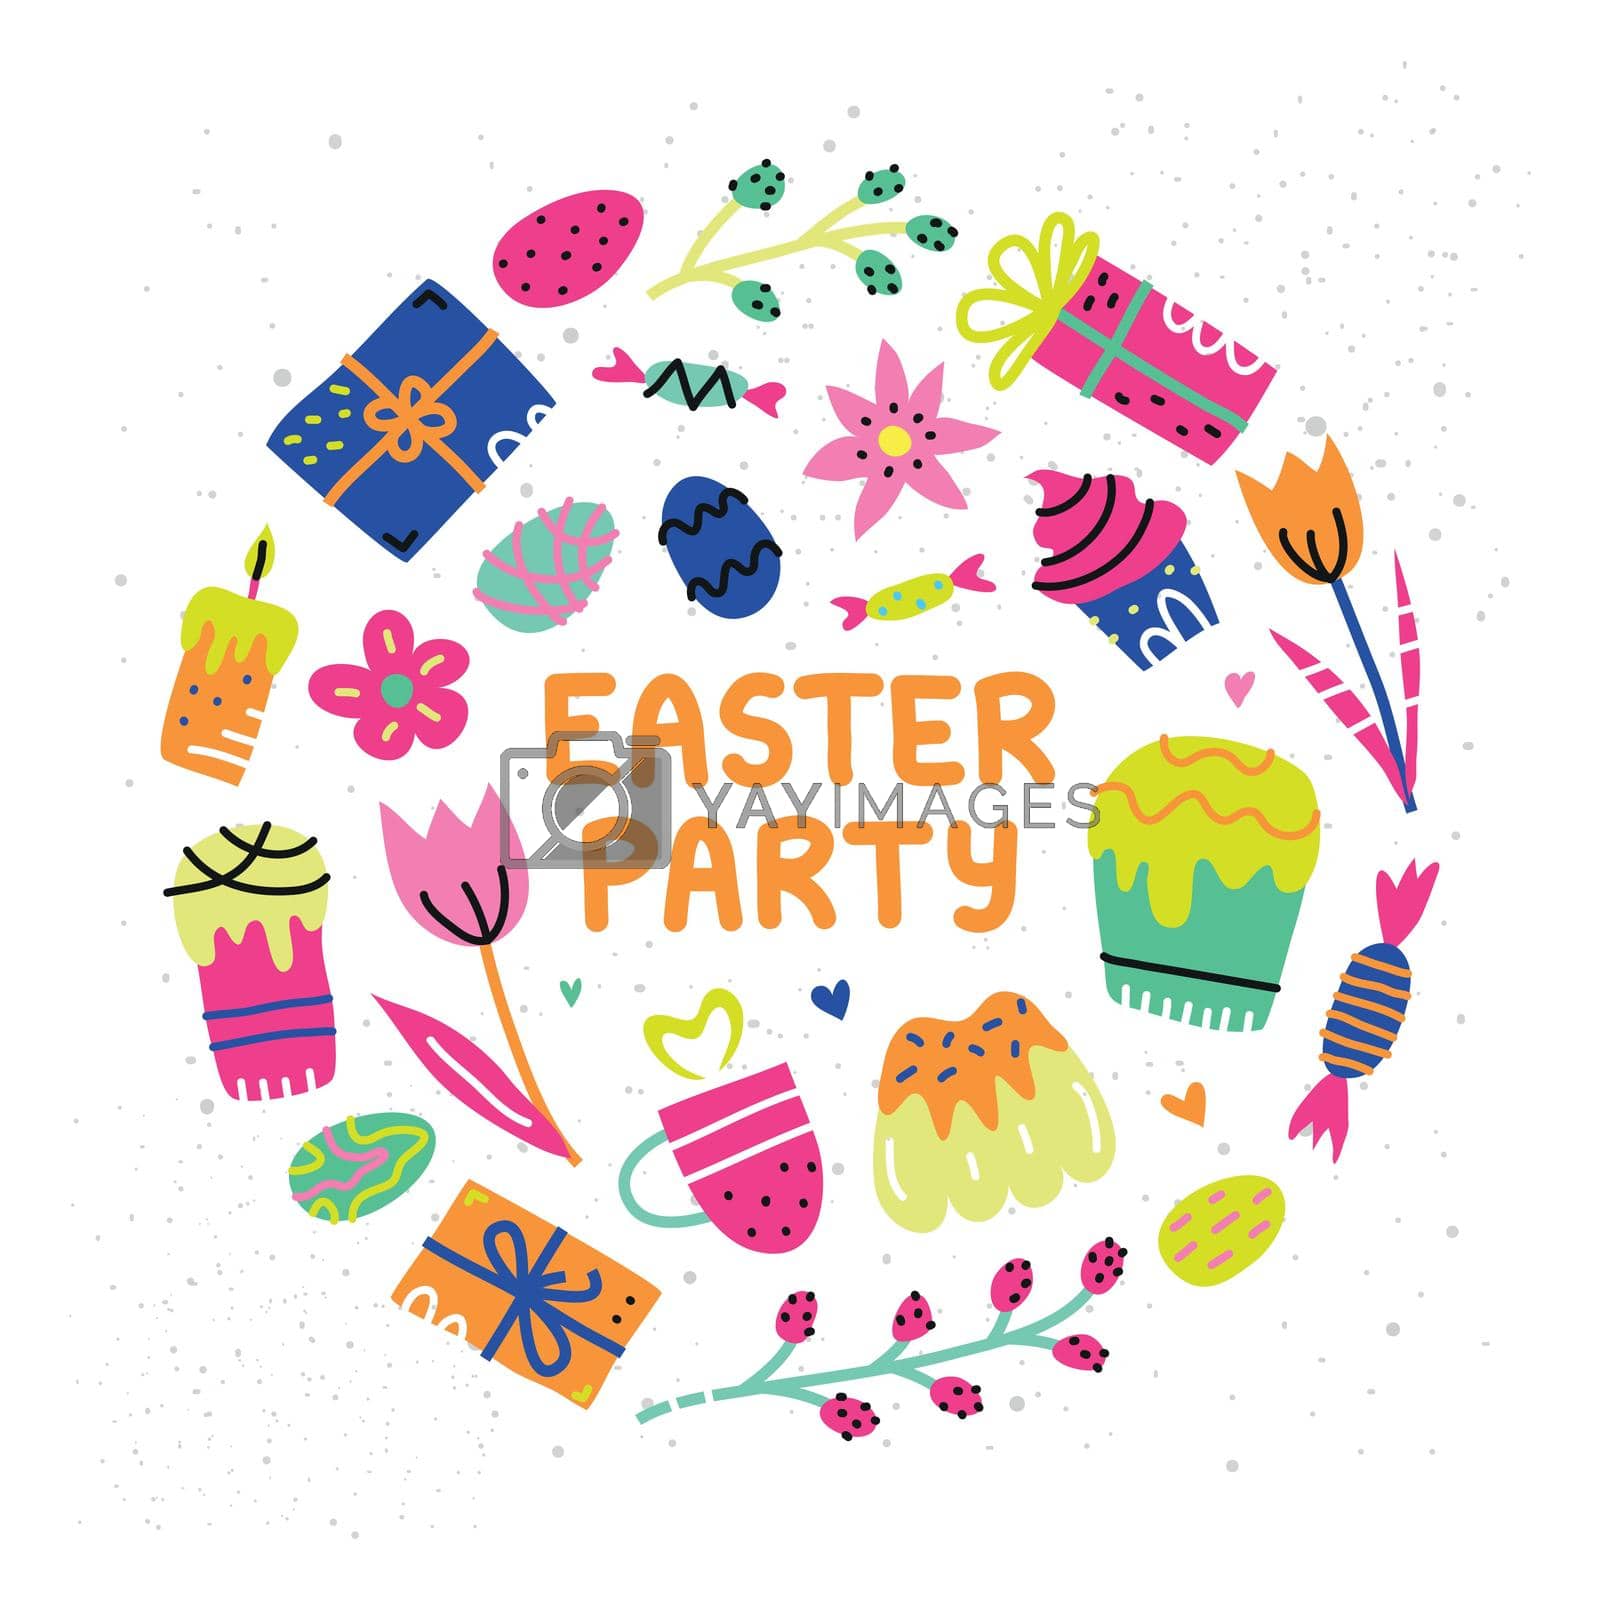 Colorful doodle icons for Easter celebration composed in circle shape with lettering.